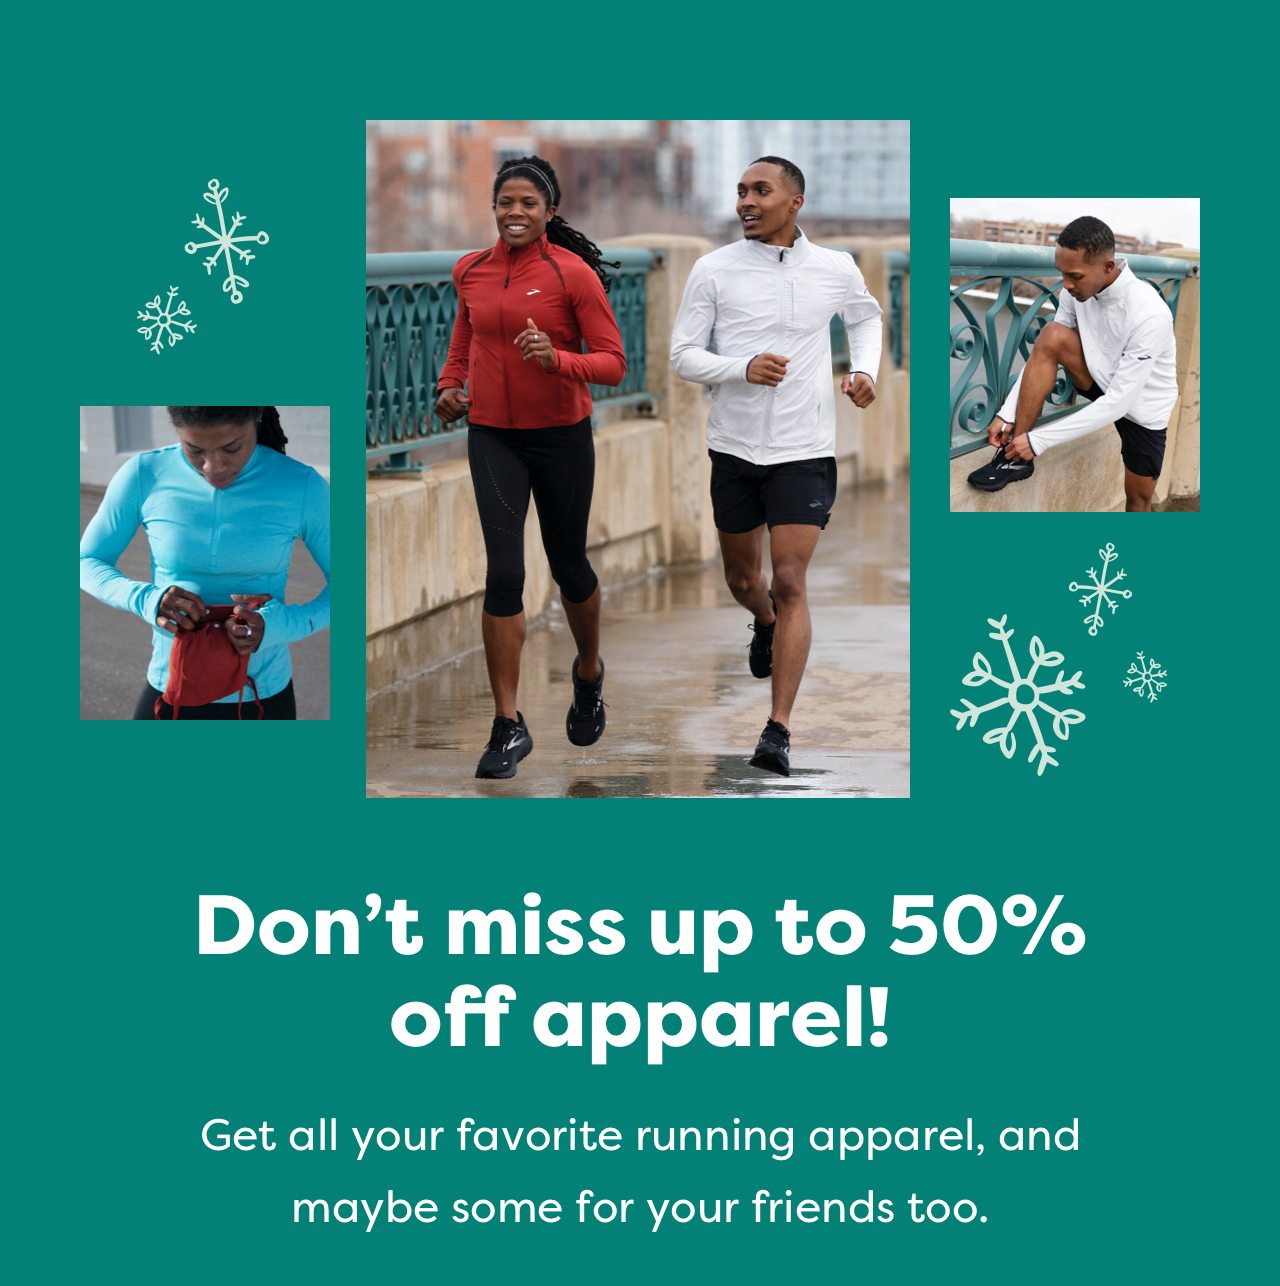 Don’t miss up to 50% off apparel! | Get all your favorite running apparel, and maybe some for your friends too.